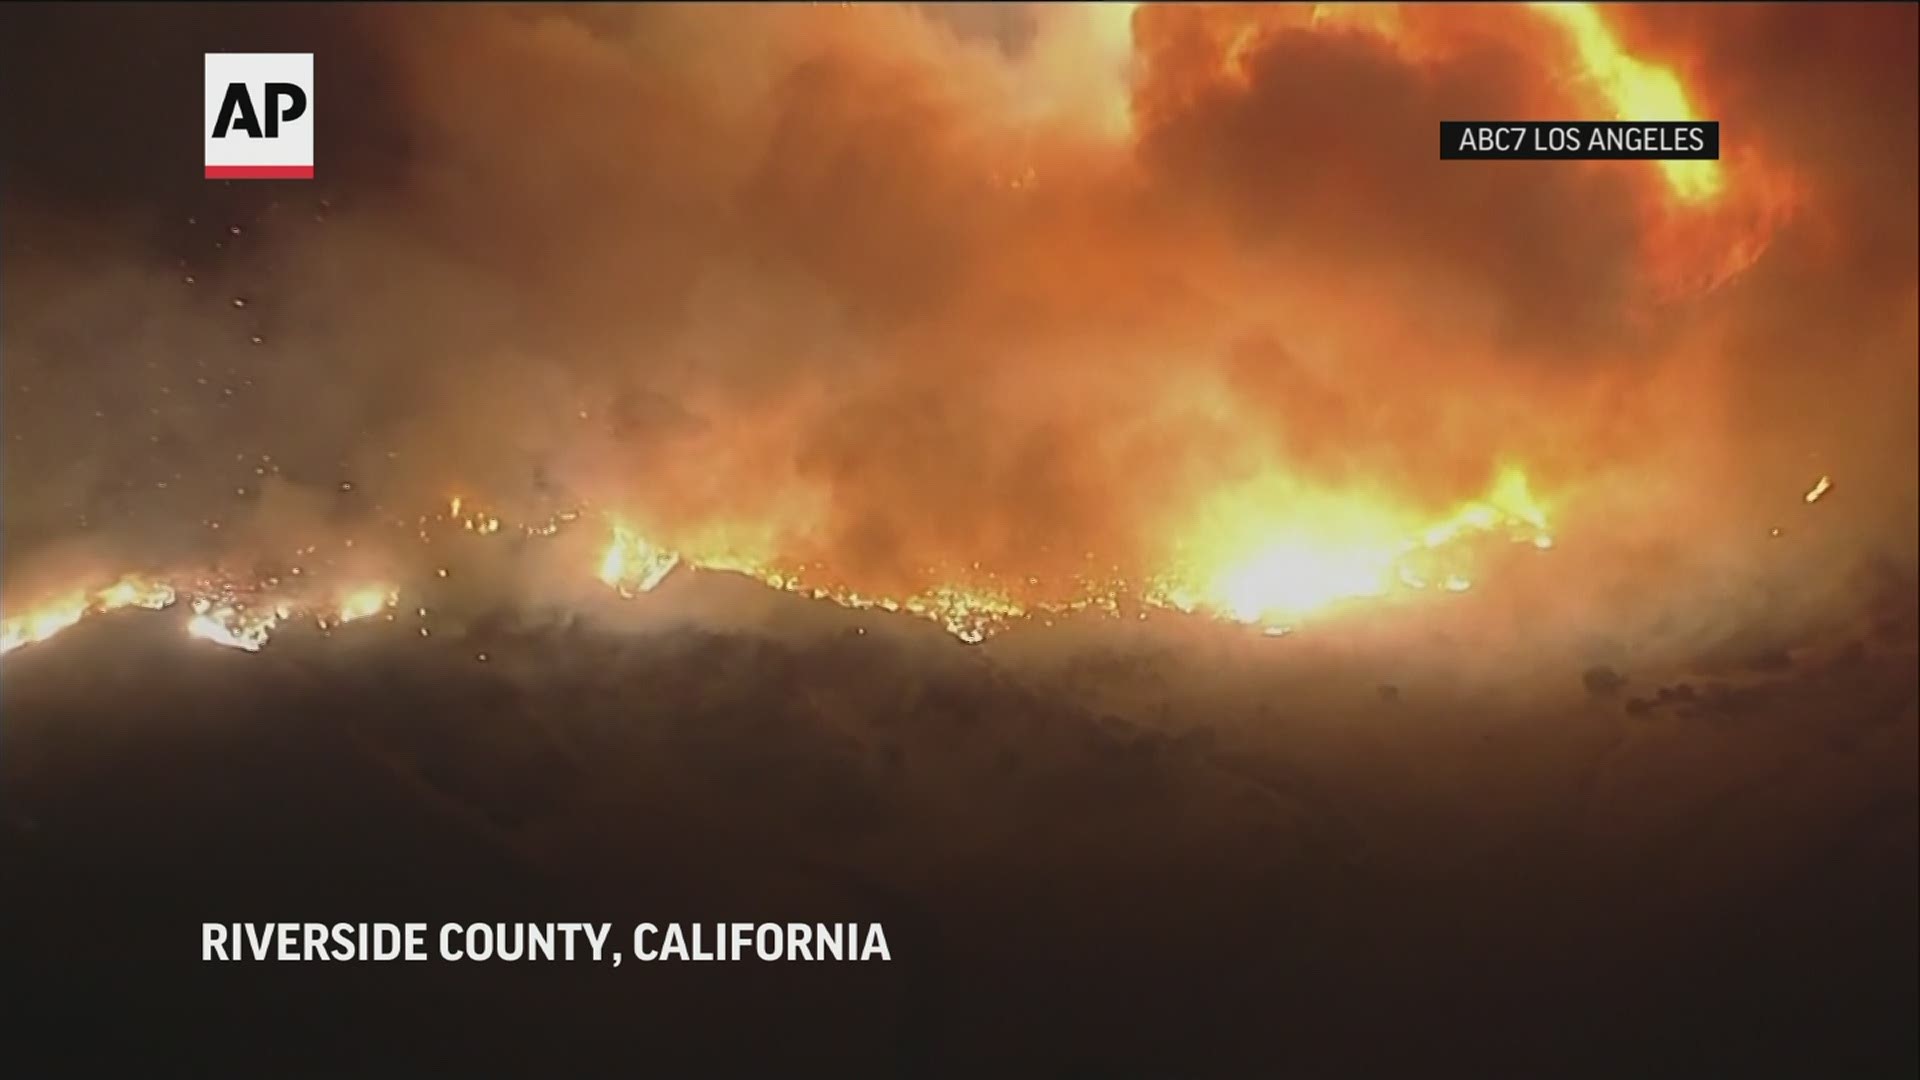 Crews east of Los Angeles are struggling to contain the "Apple Fire." By Sunday evening, according to the state firefighting agency Cal Fire.